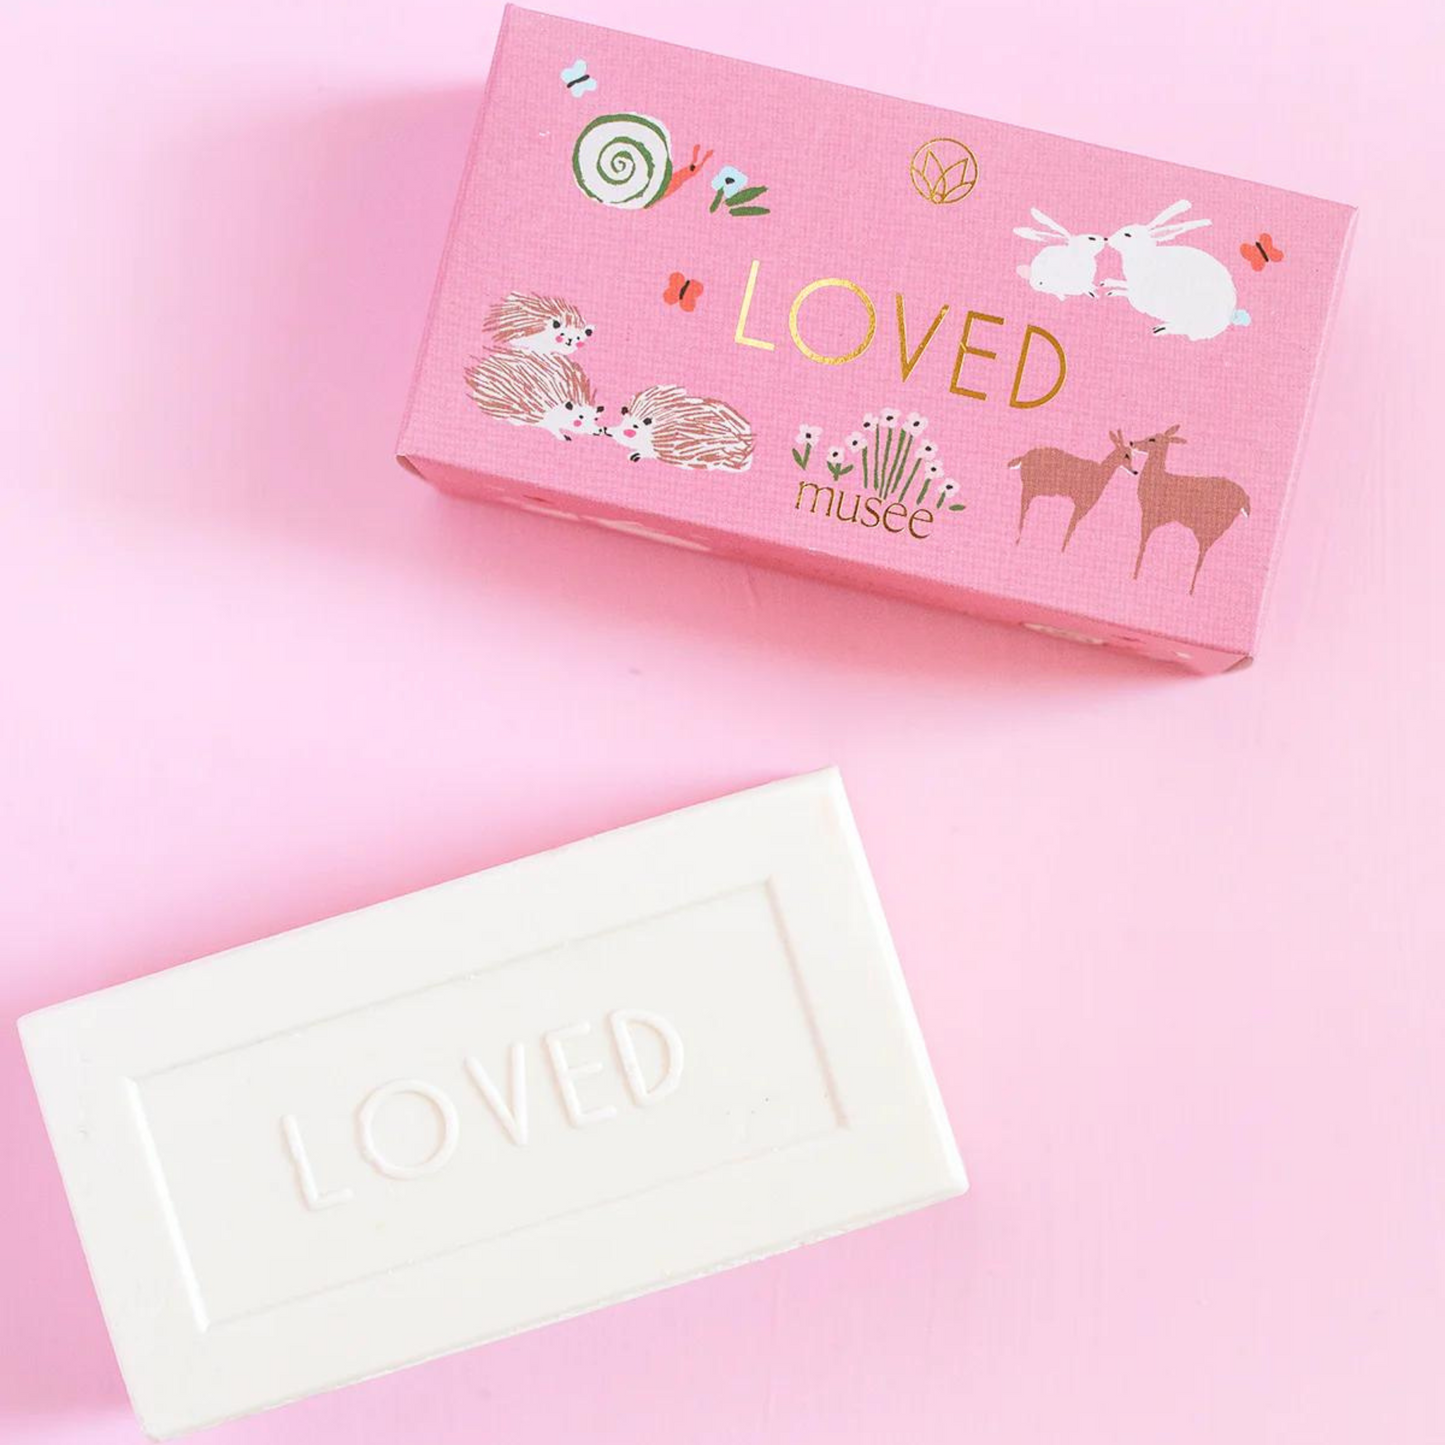 MUSEE - BAR SOAP - LOVED